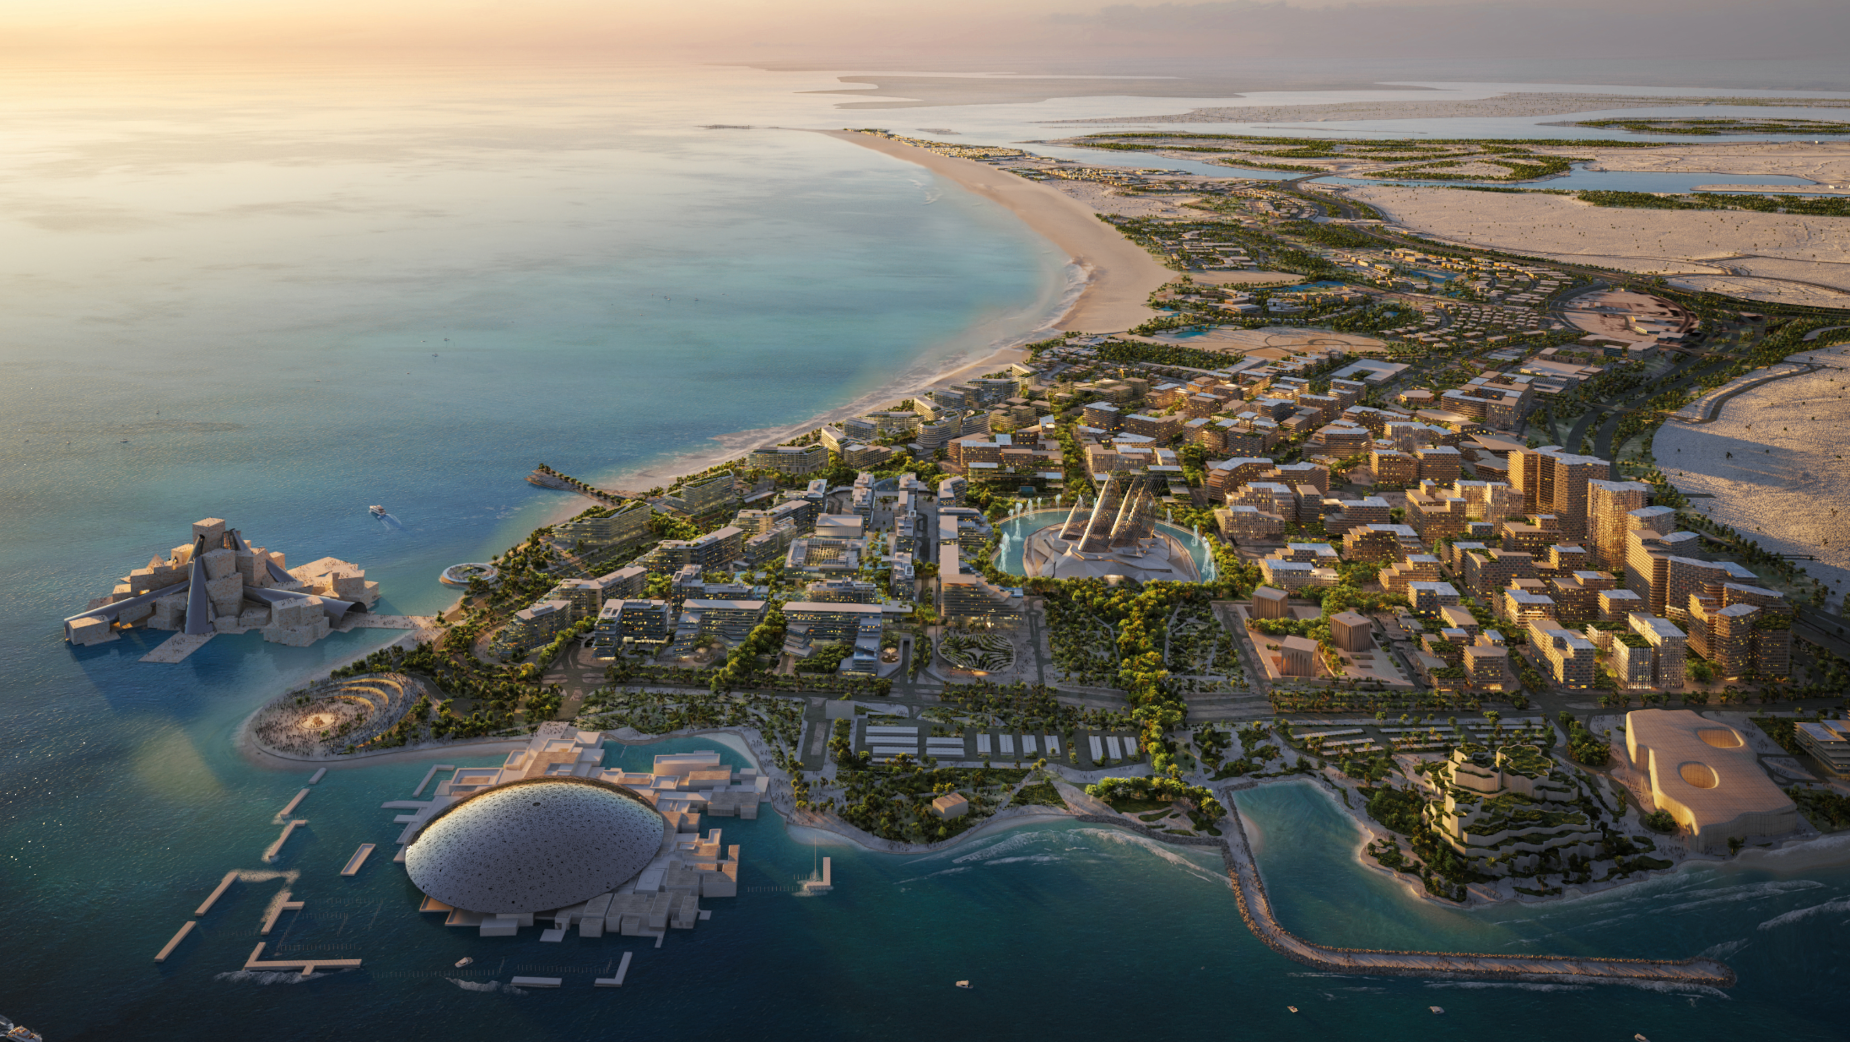 Abu Dhabi Tourism Invites the World to 'Be Moved in a Thousand Ways' | LBBOnline